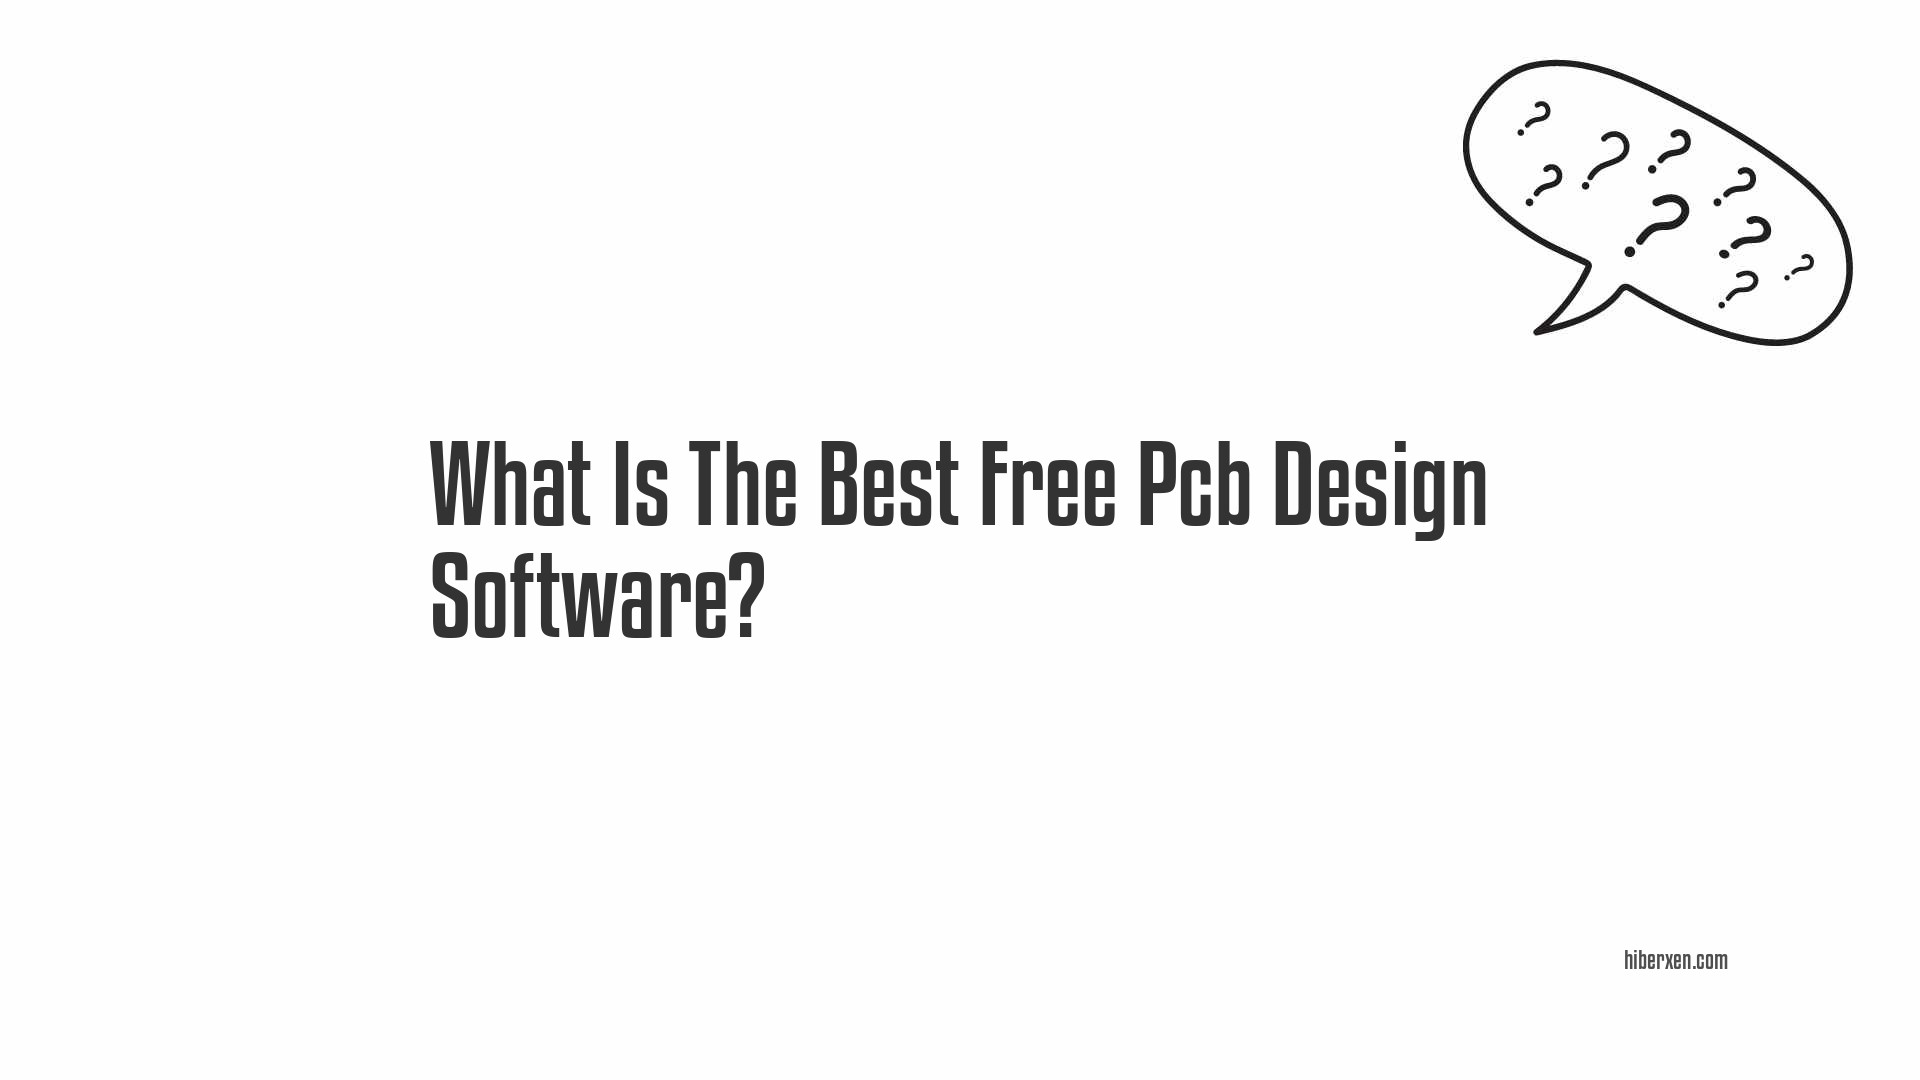 What Is The Best Free Pcb Design Software?